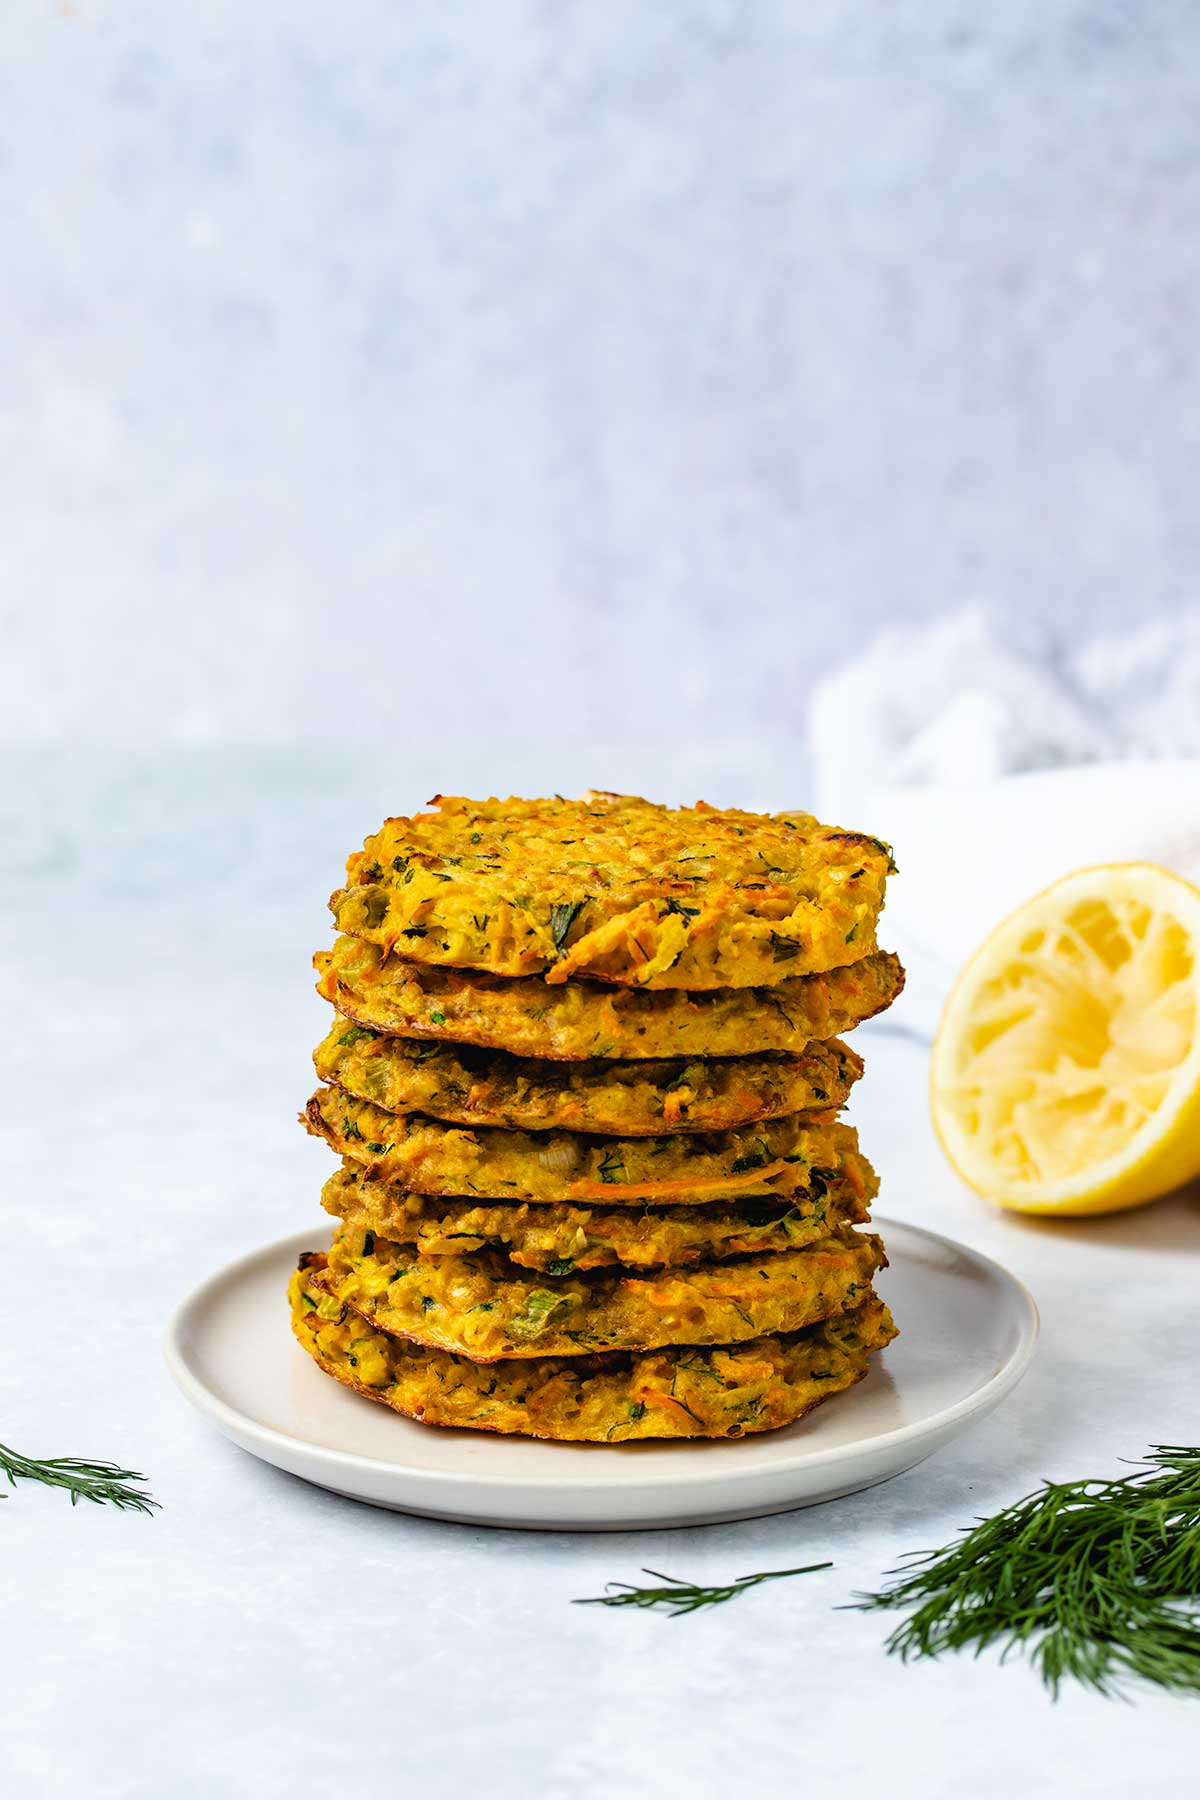 A stack of 7 zucchini carrot fritters on a cream coloured plate next to dill garnish and half a squeezed lemon